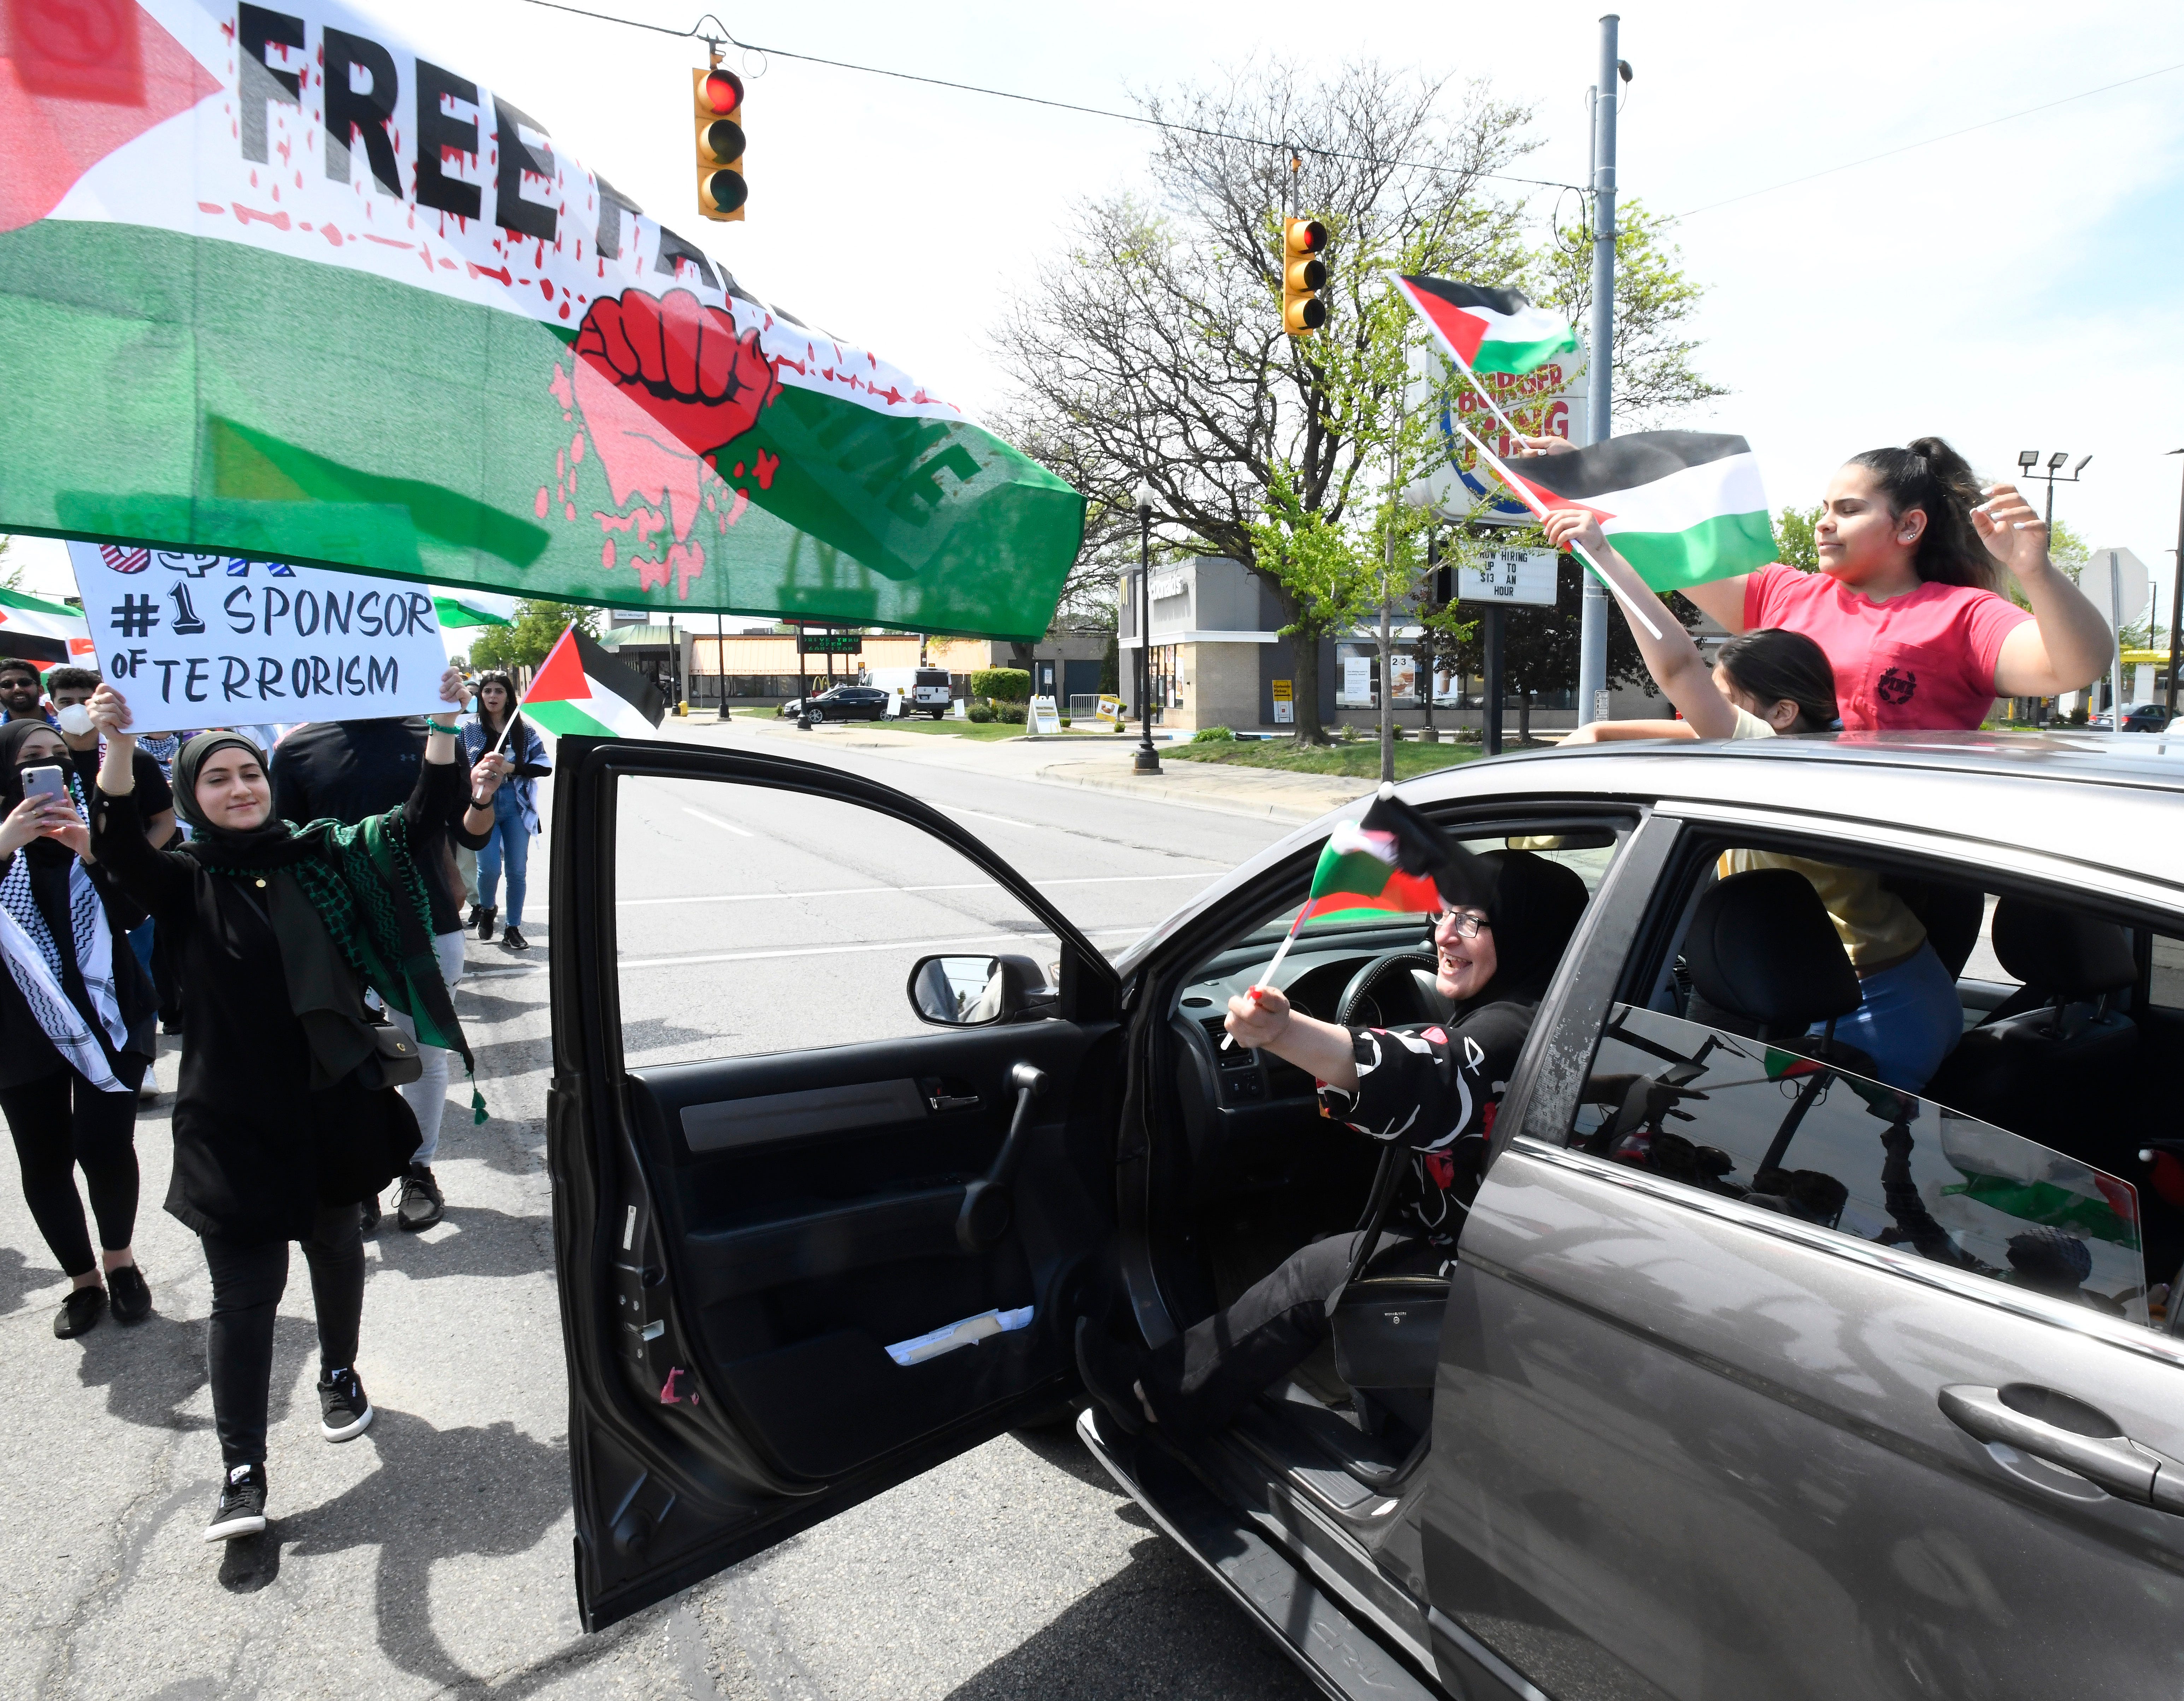 Cars pull over and show support as thousands of Palestinian supporters march down westbound Michigan Avenue during a Palestinian protest and march, at the same time President Joe Biden is visiting in another part of Dearborn, Michigan on May 18, 2021.